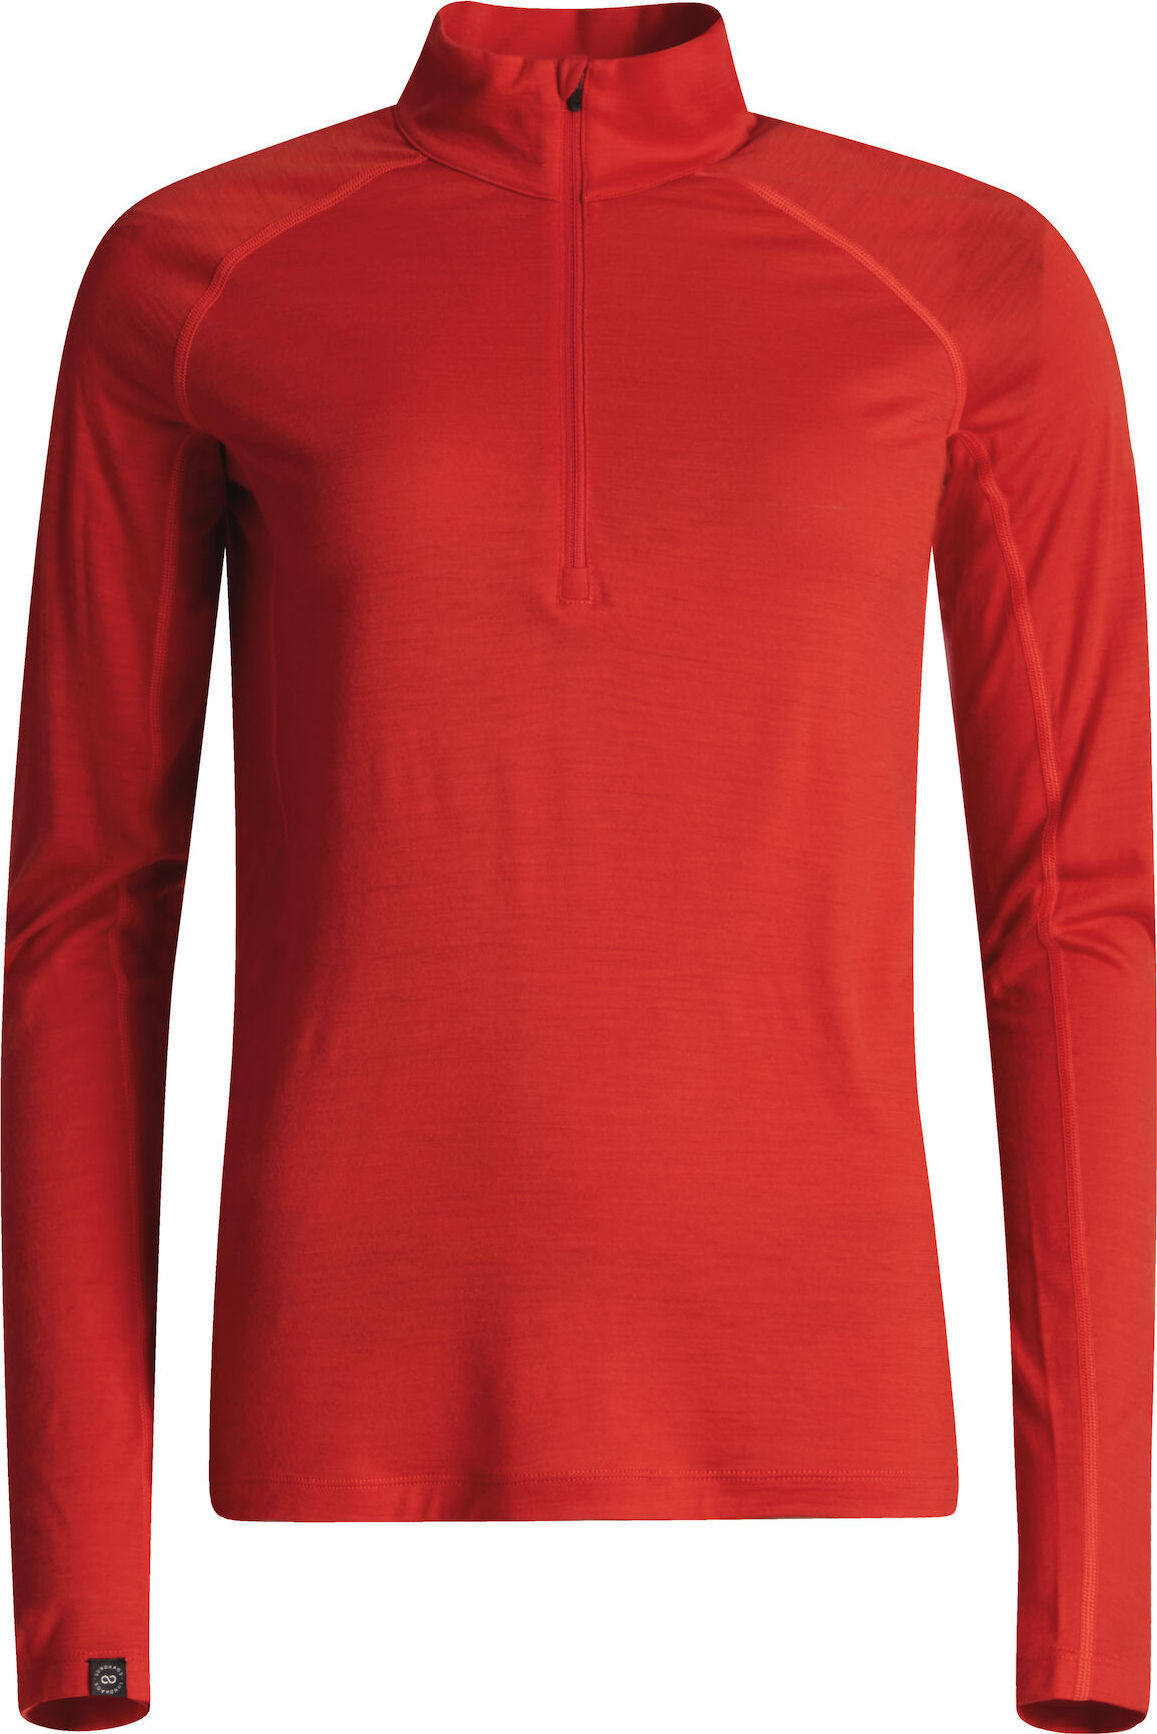 Lundhags Women's Gimmer Merino Light 1/2 Zip Lively Red L, Lively Red